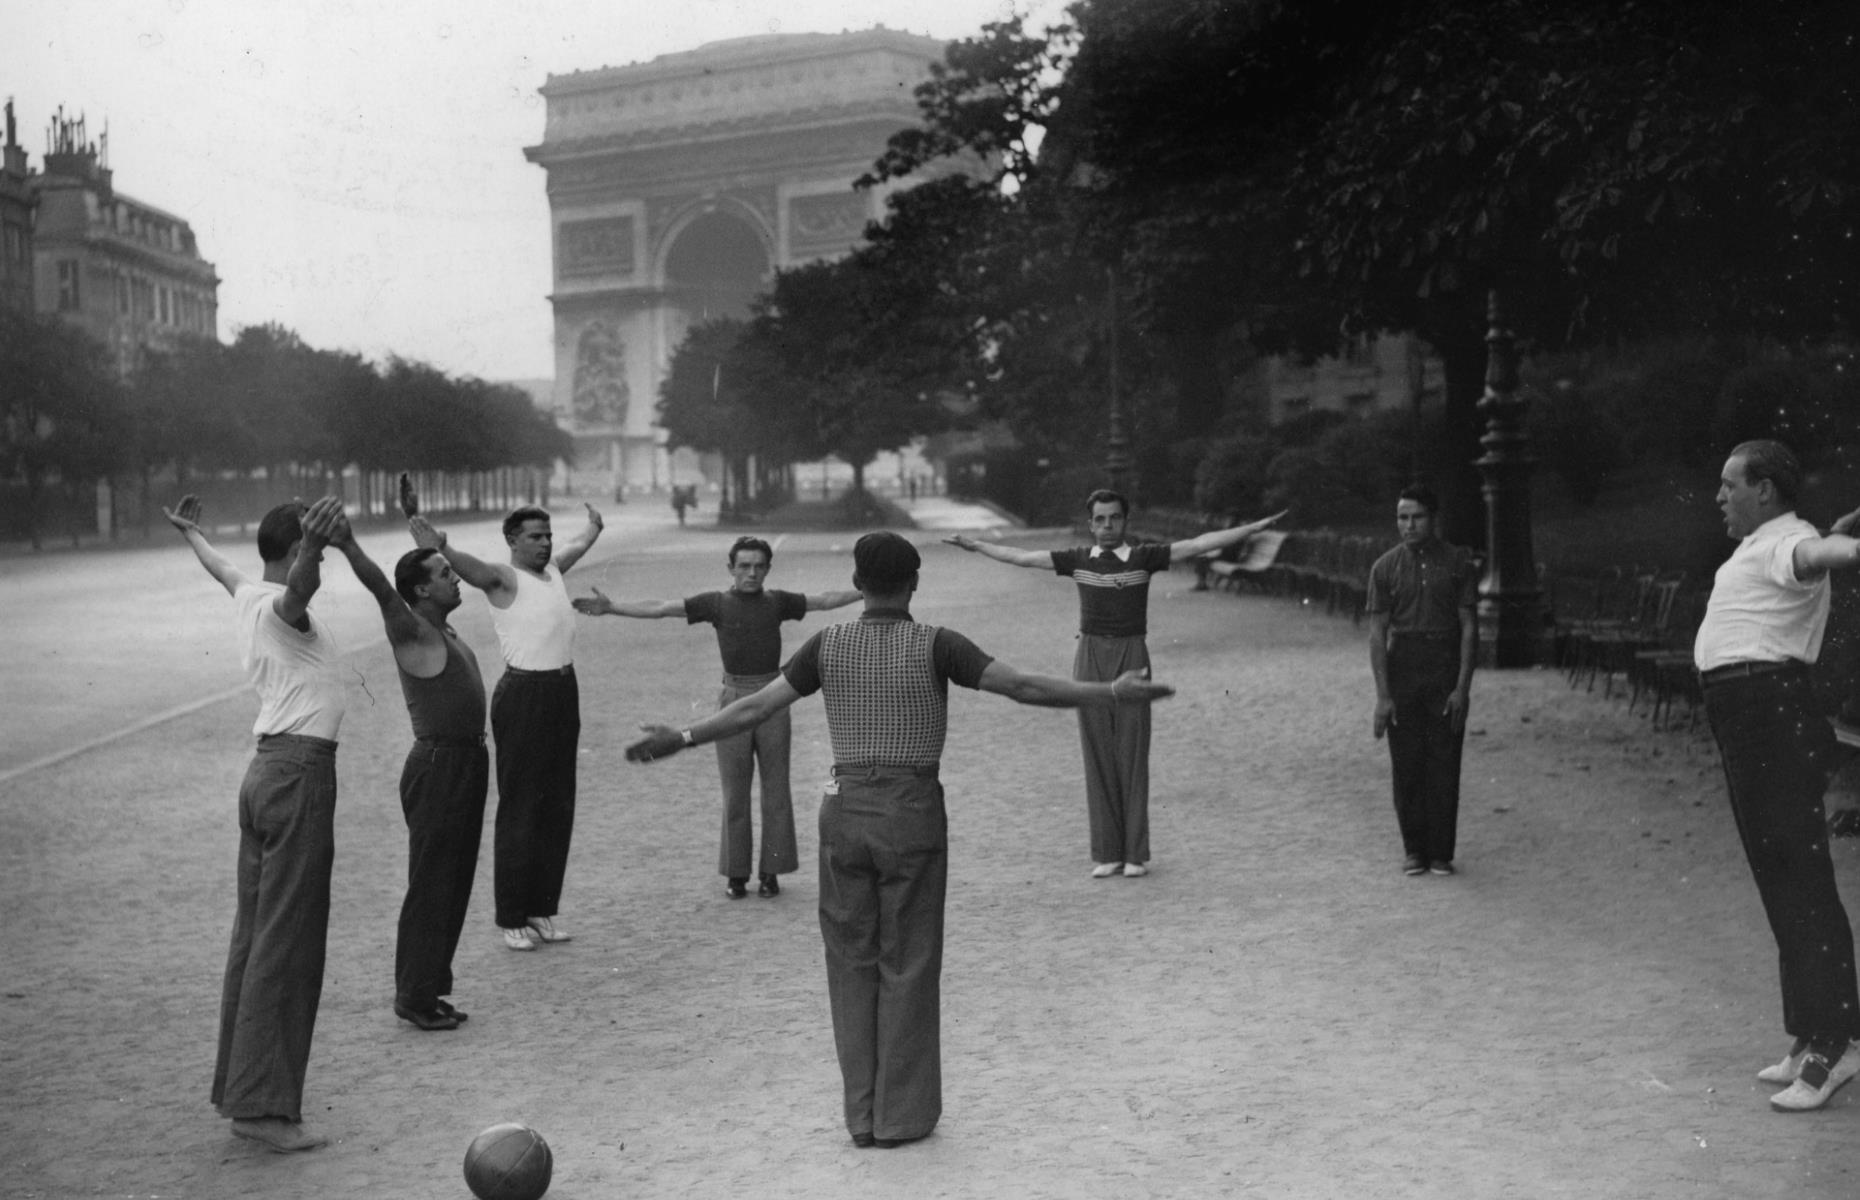 <p>This striking photograph from the 1920s shows a group of men taking part in an outdoor exercise class next to the Arc de Triomphe – an activity you might have difficulty with during peak season nowadays! The iconic arch was commissioned by Napoleon I in 1806, intended to celebrate the victories of the French army in the Battle of Austerlitz (1805) and it took 30 years to build. </p>